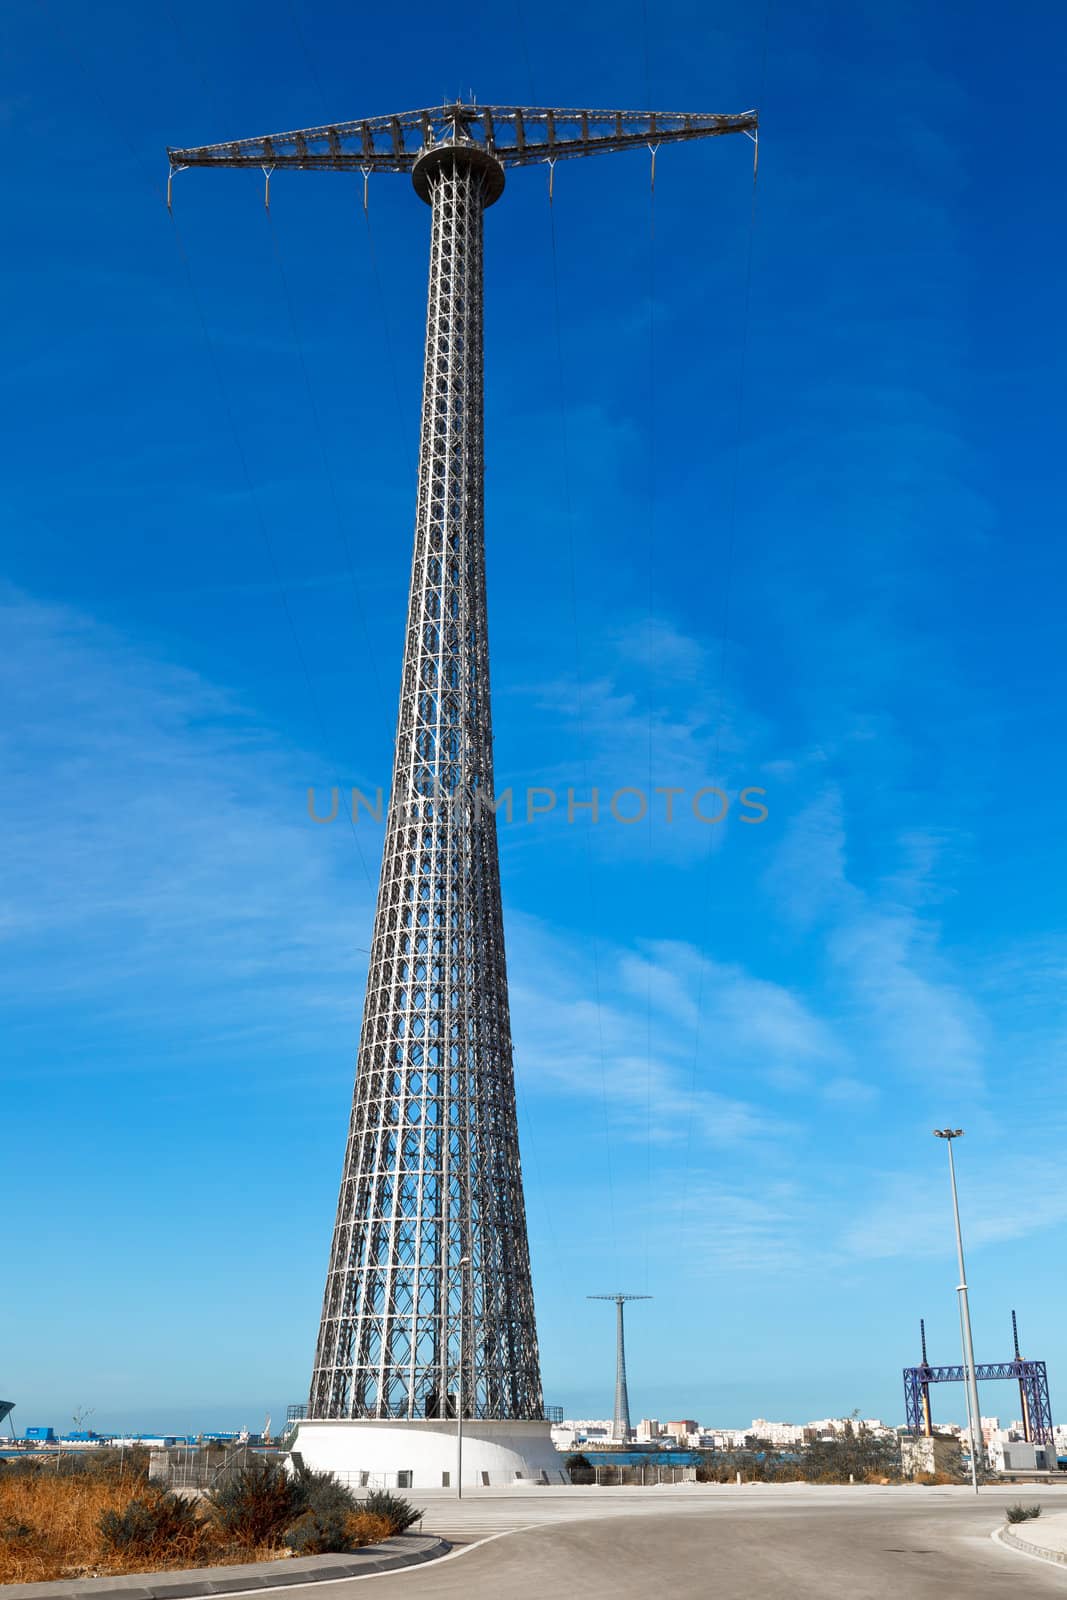 Communications tower with a beautiful blue sky